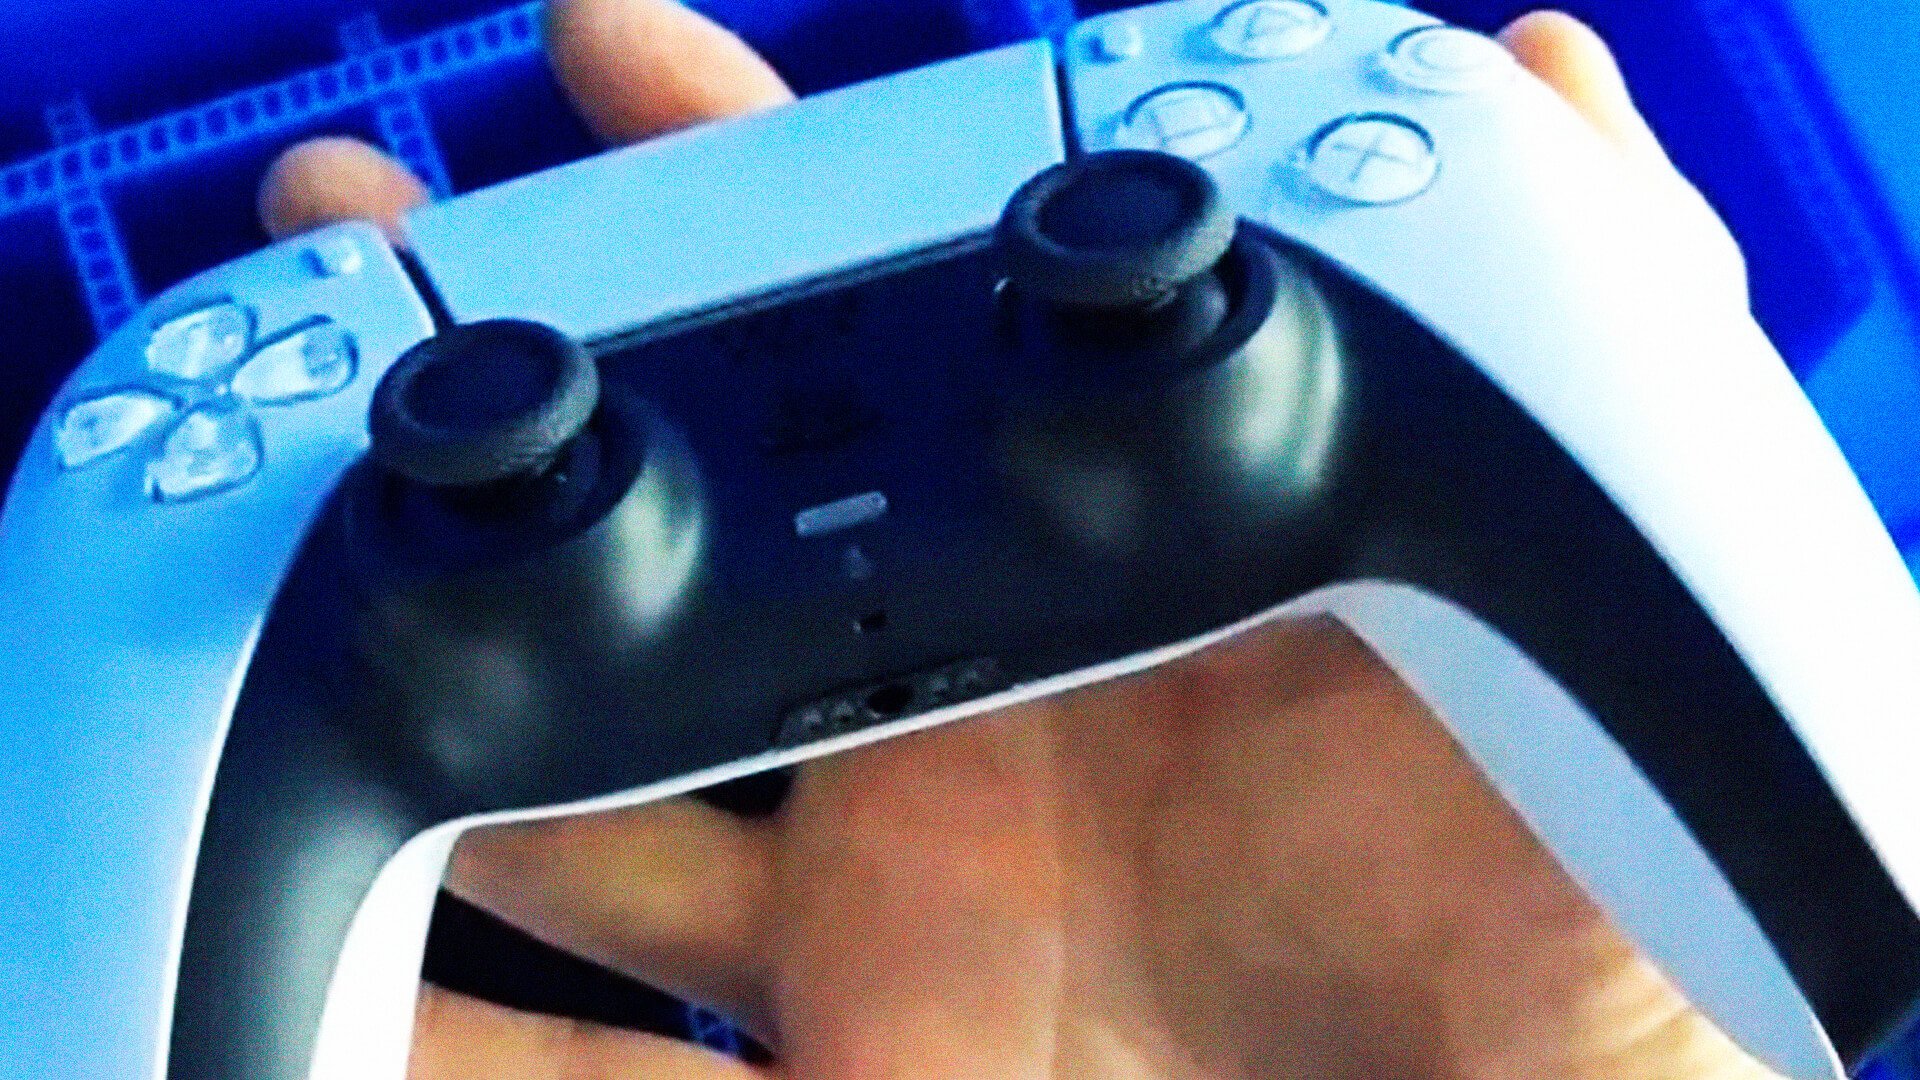 PlayStation 5 Controle 2020 Sony